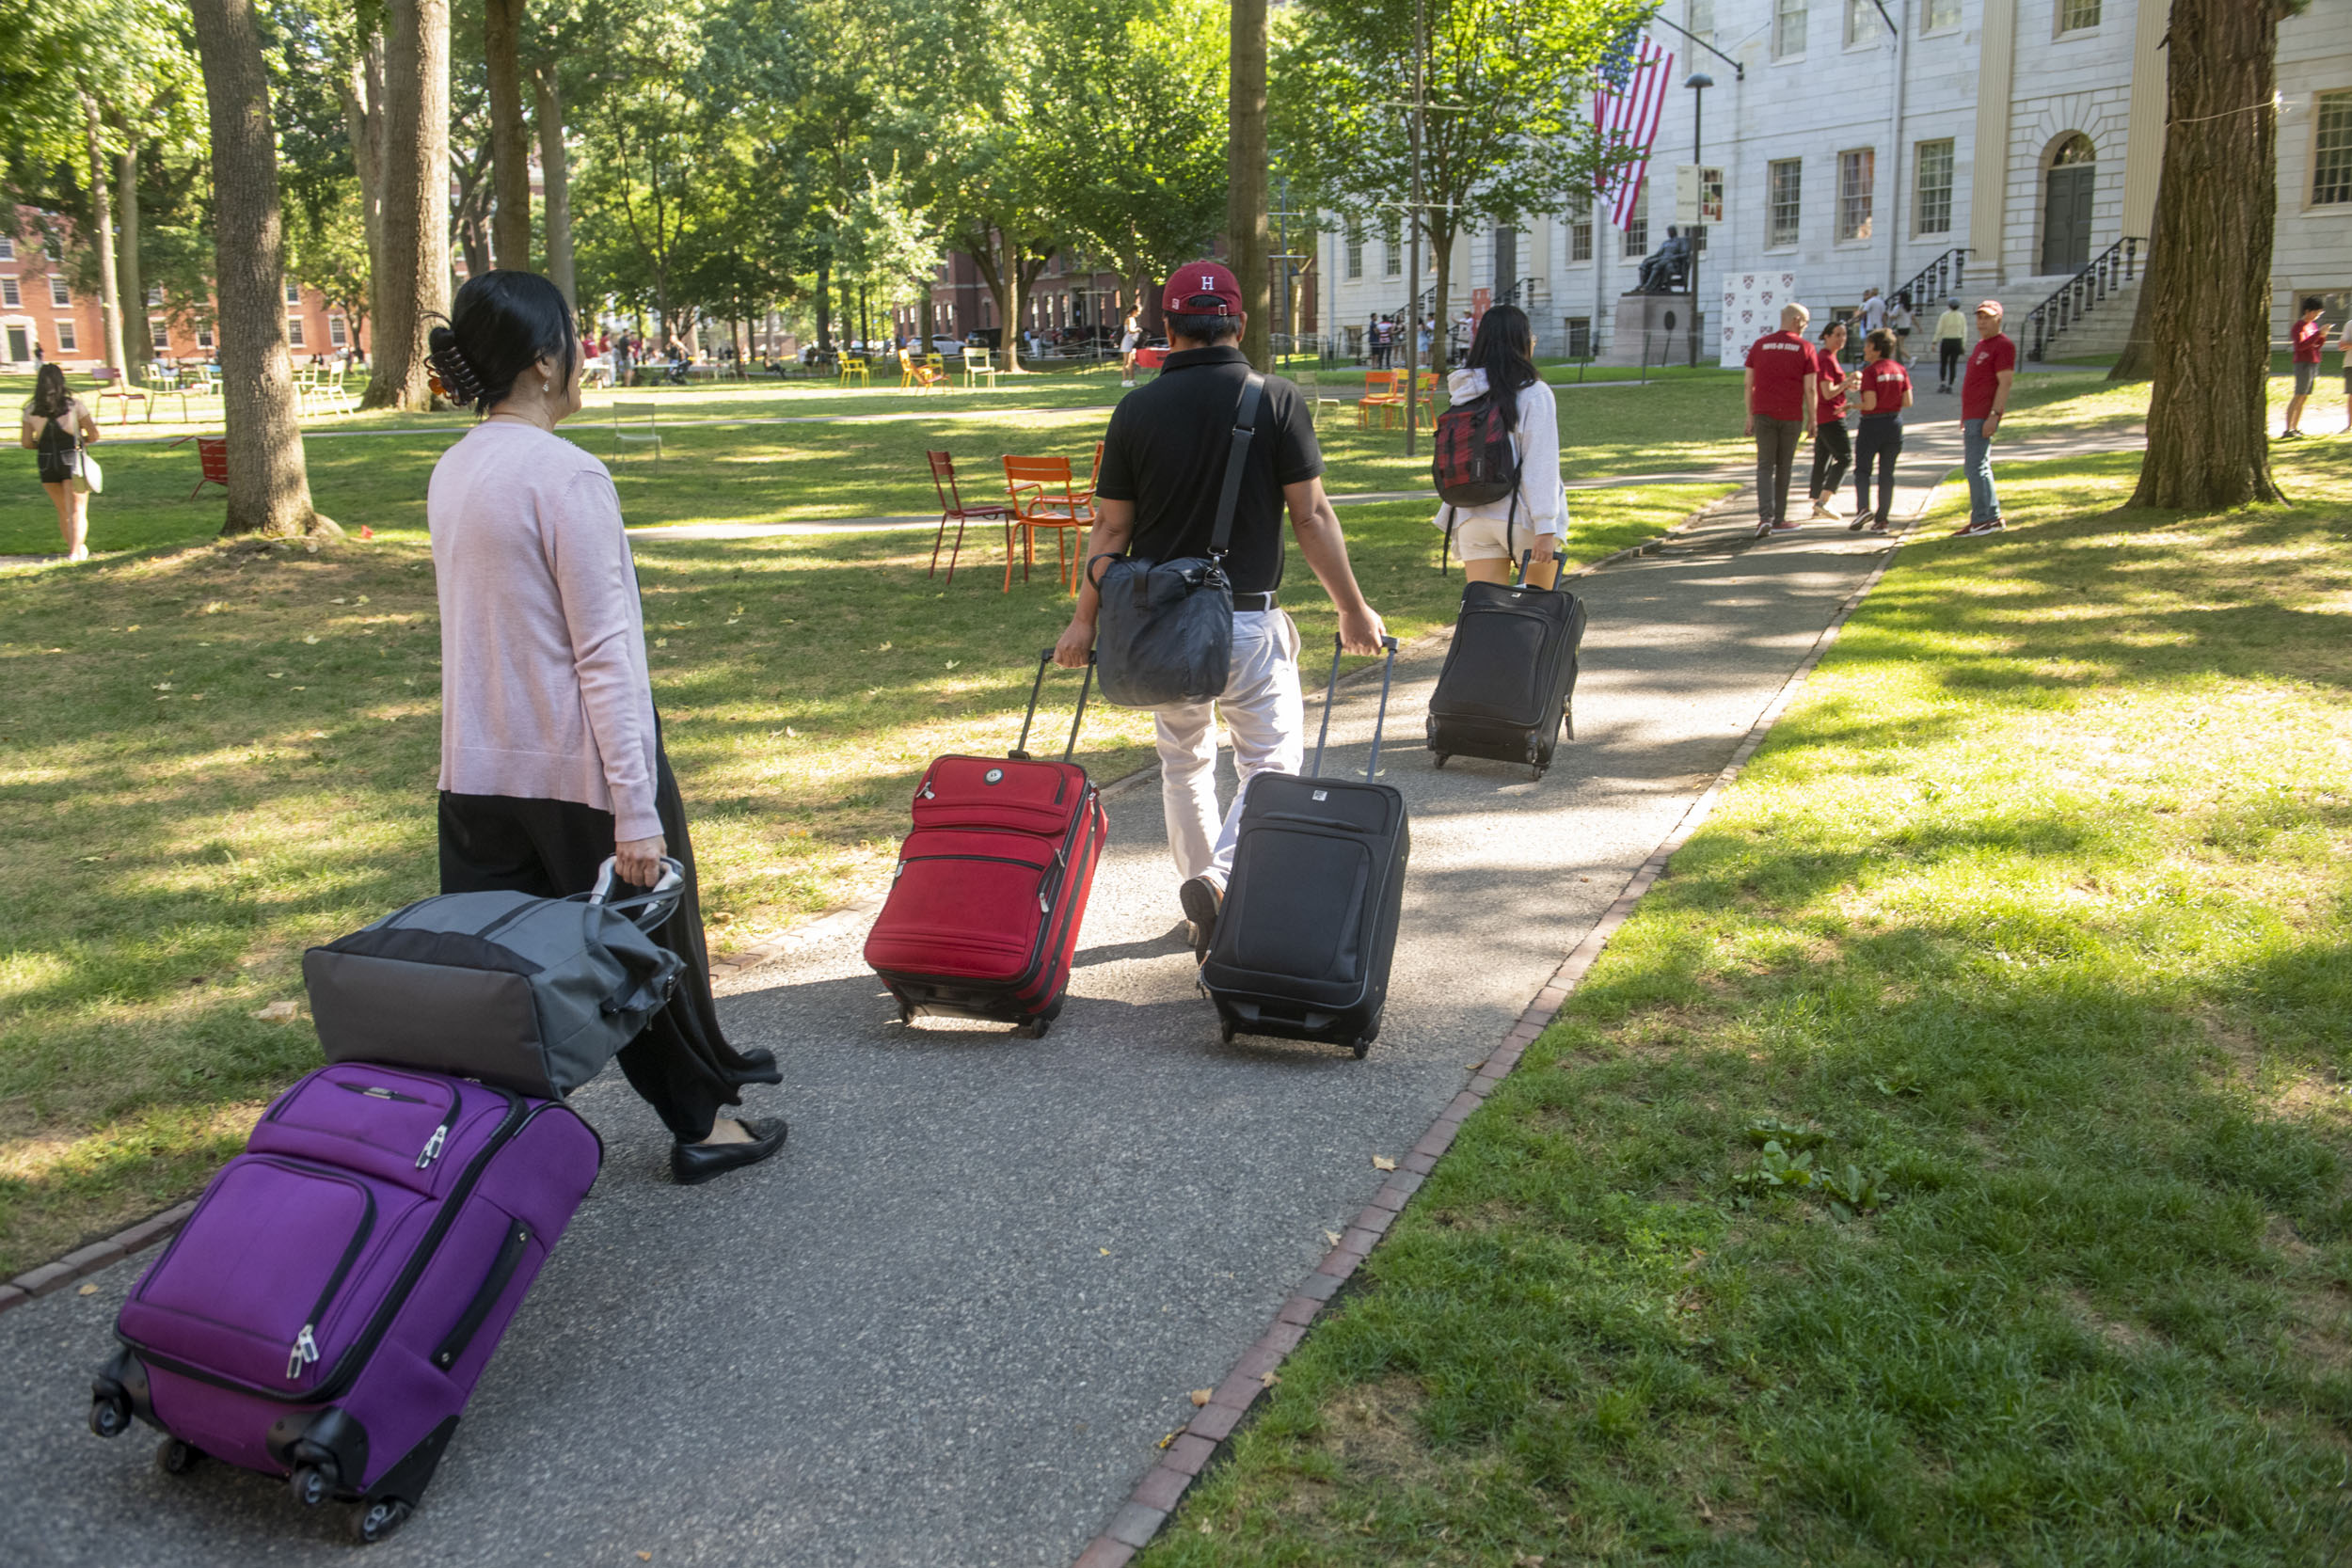 Students bring suitcases into the Yard.